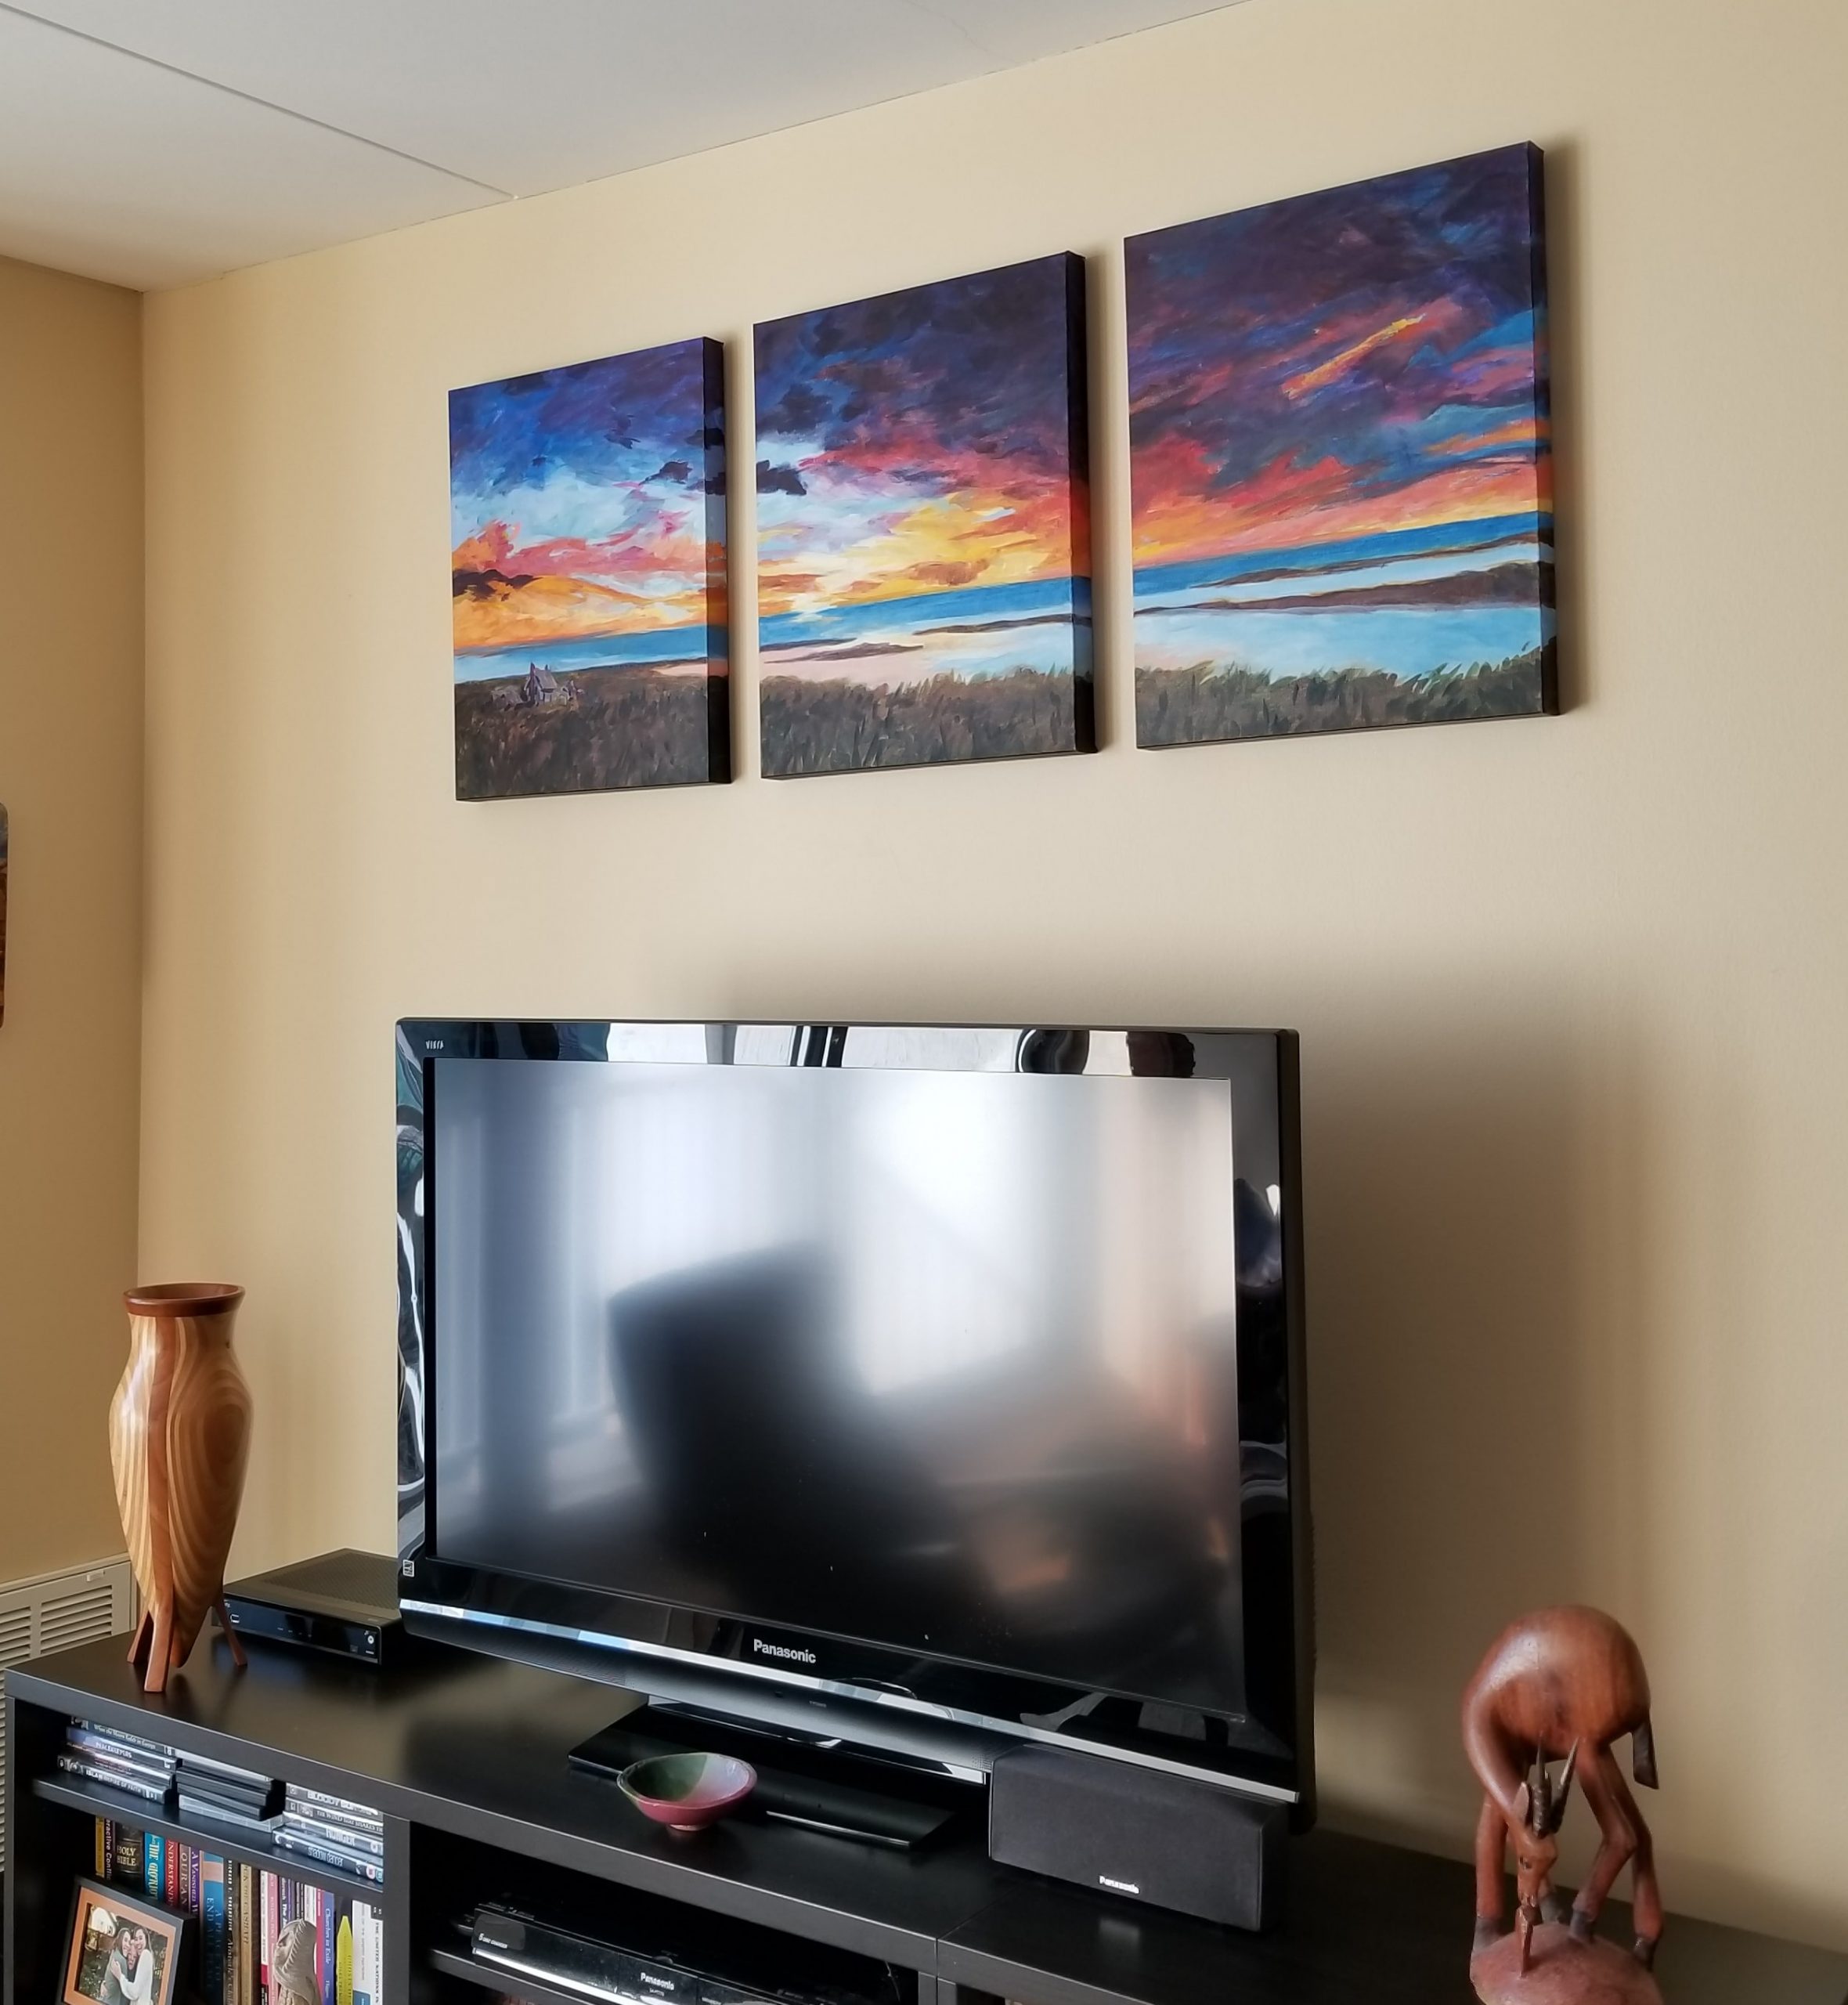 A set of three paintings showing a marshy landscape at sunset over a living room television